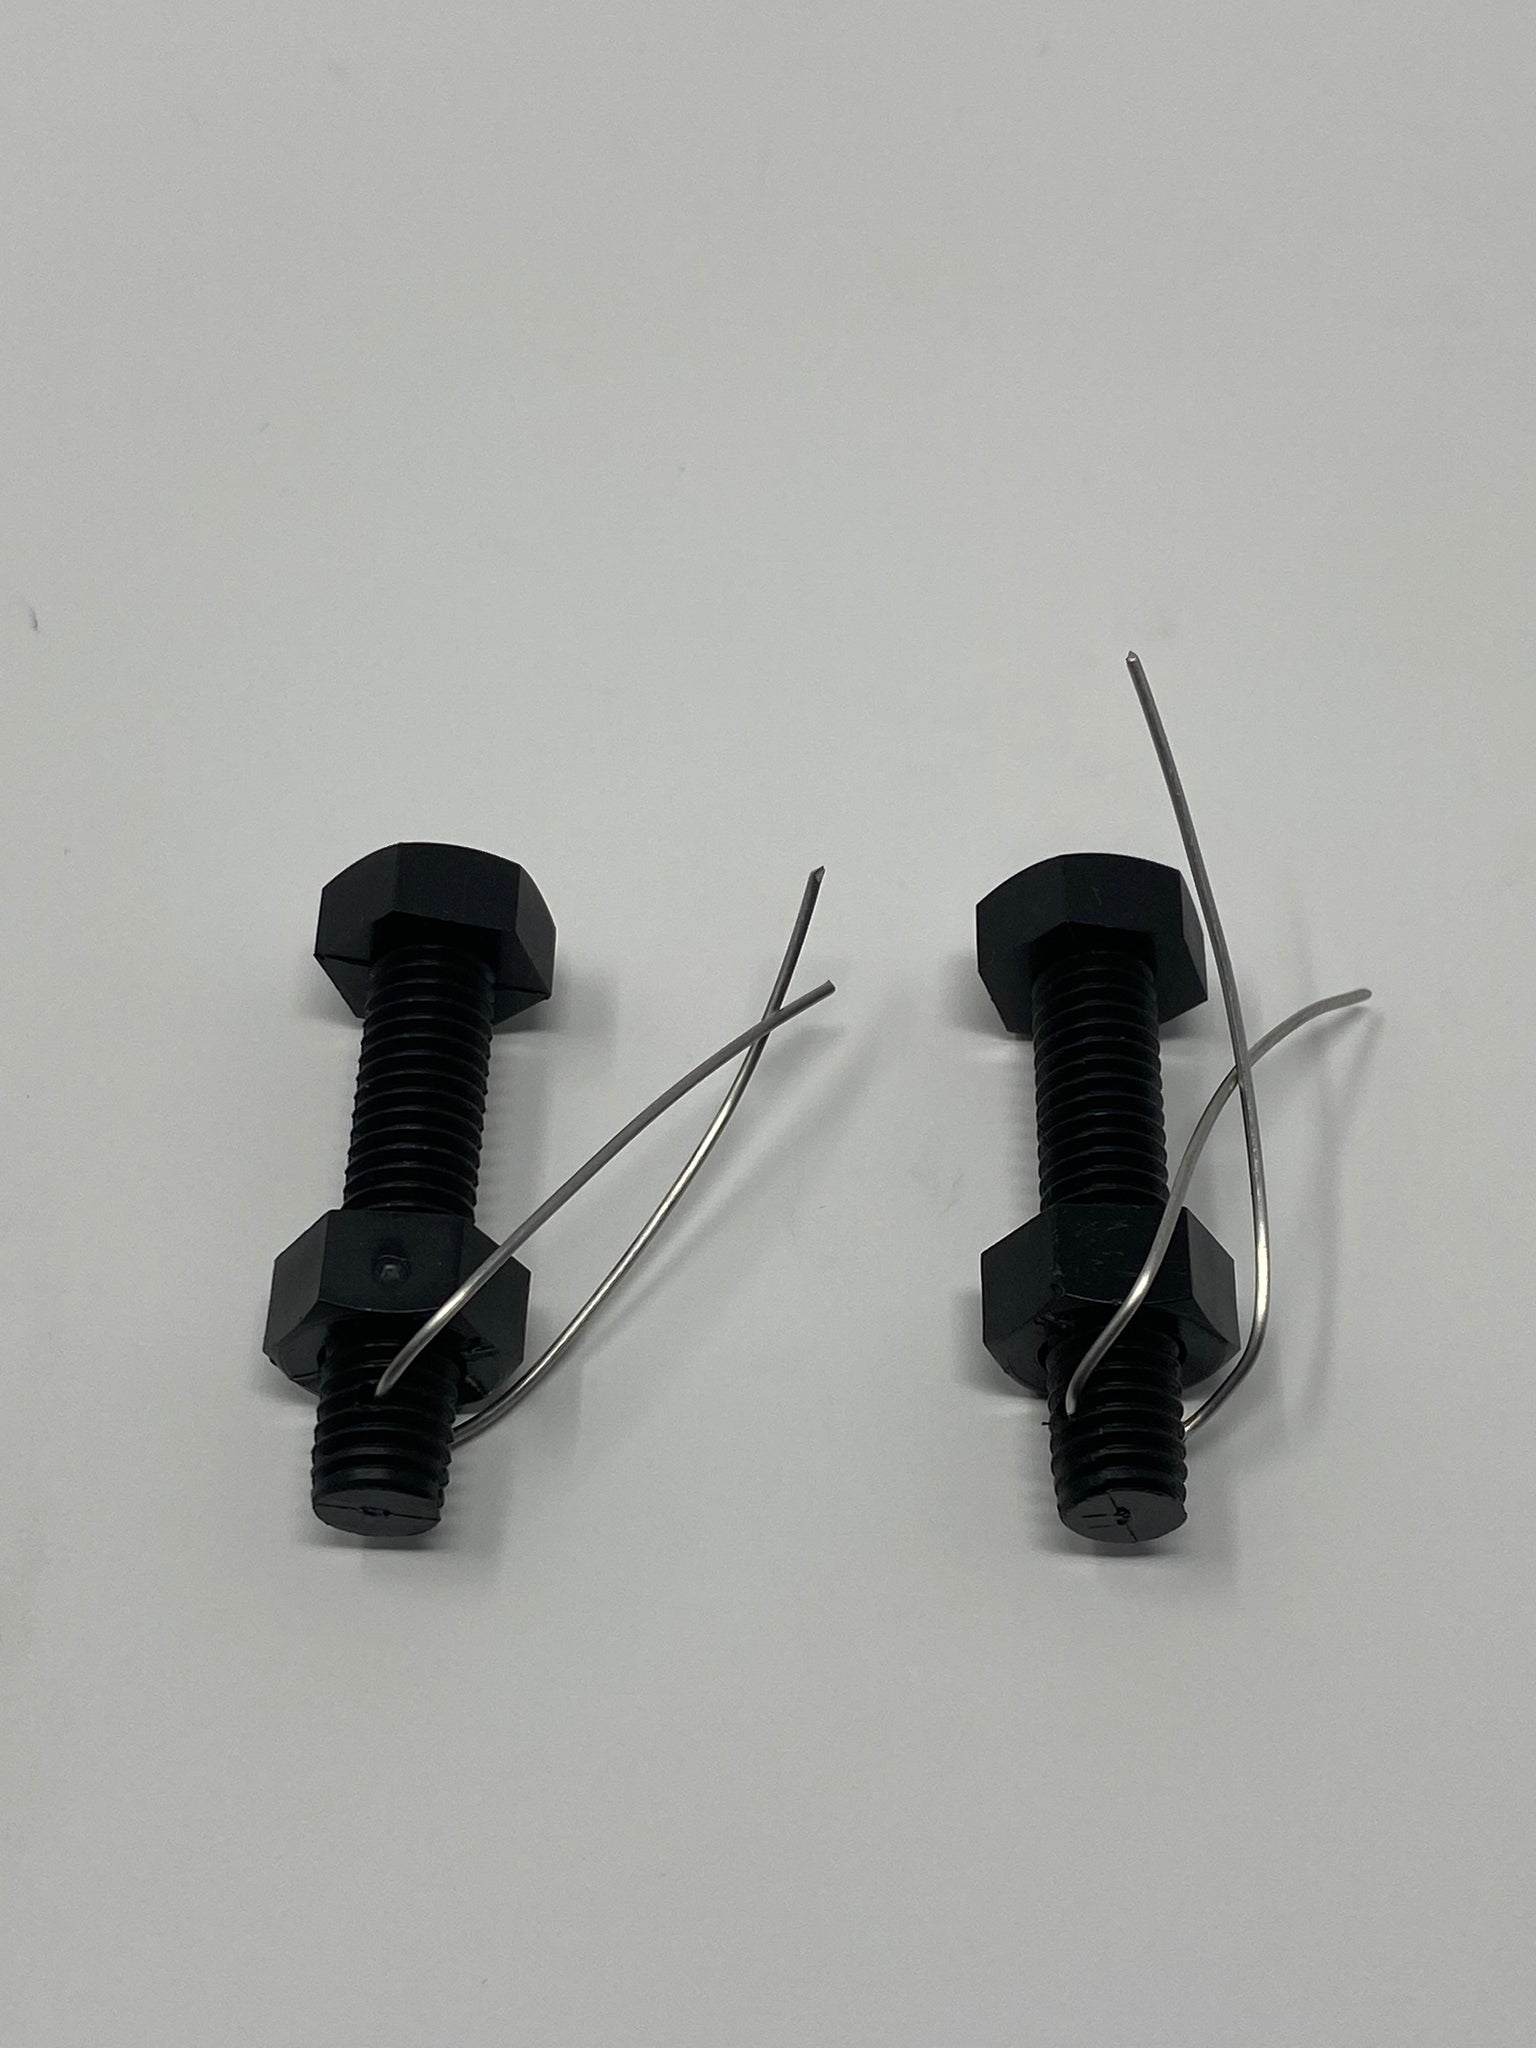 Spare Nylon "Break-Away" Bolts for Sonora Tower